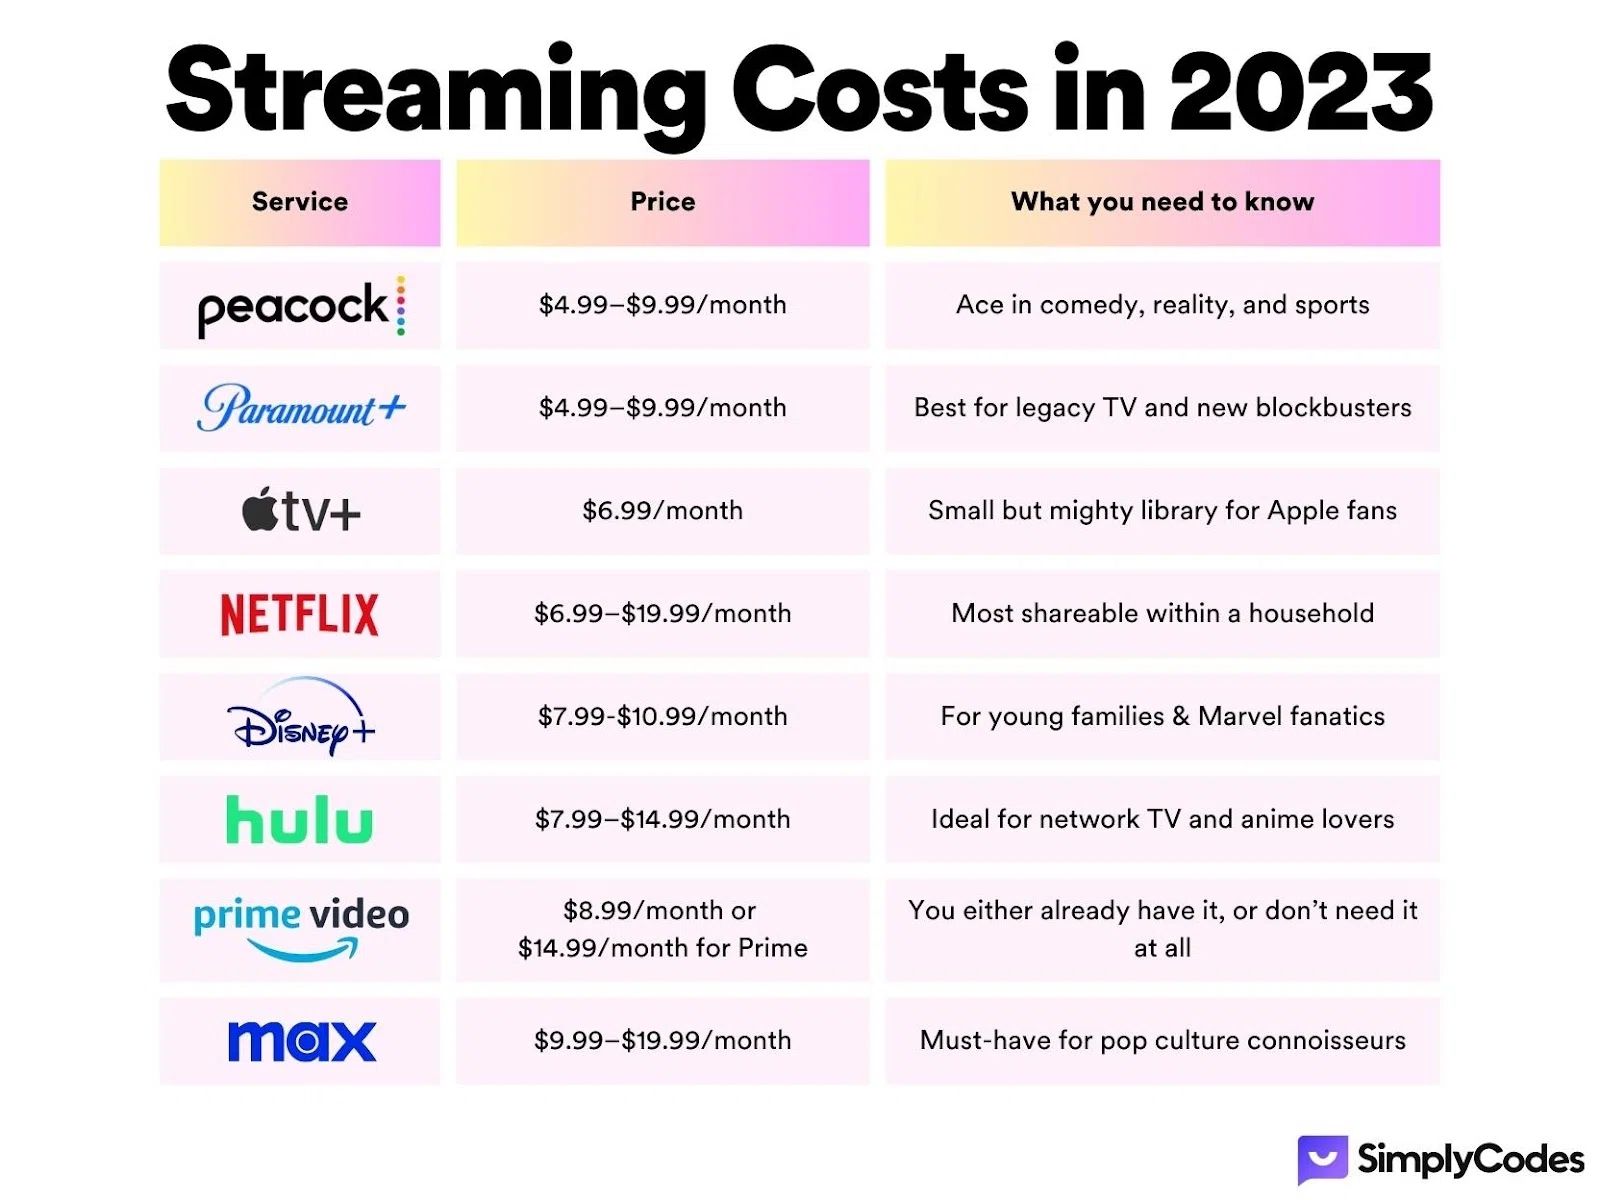 The 10 Best Streaming Bundles and Deals of 2023